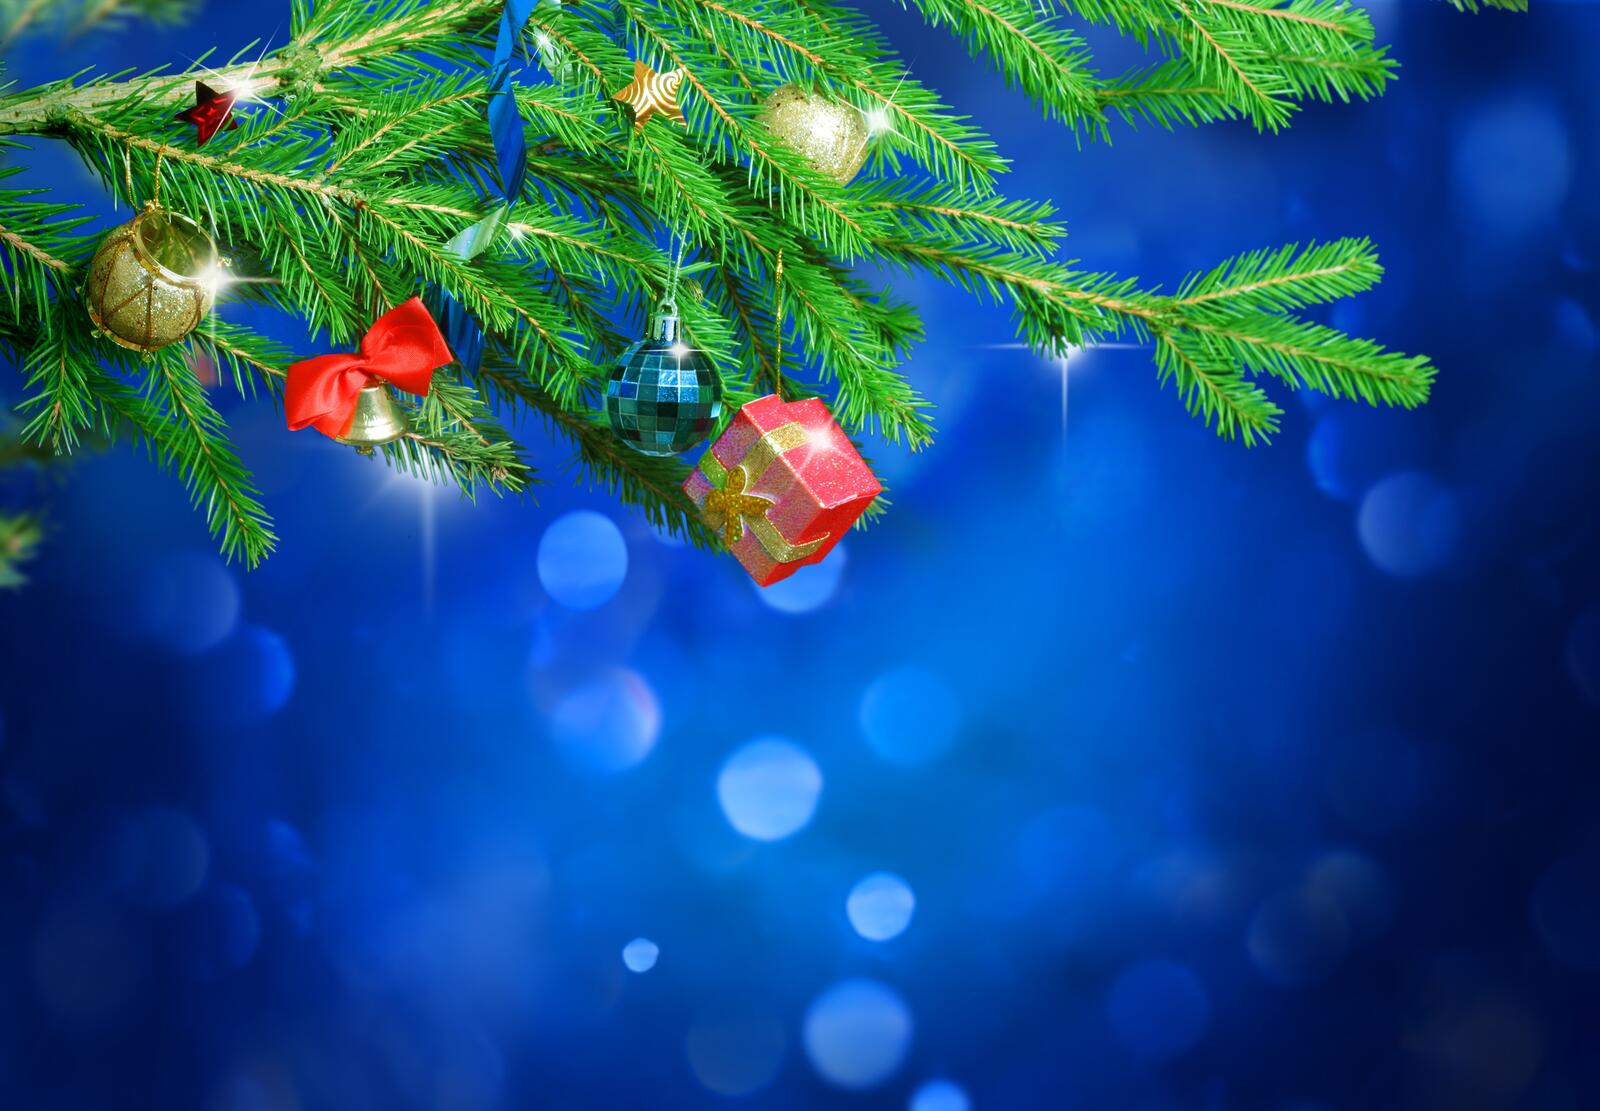 Wallpapers background Christmas tree decorations on the desktop